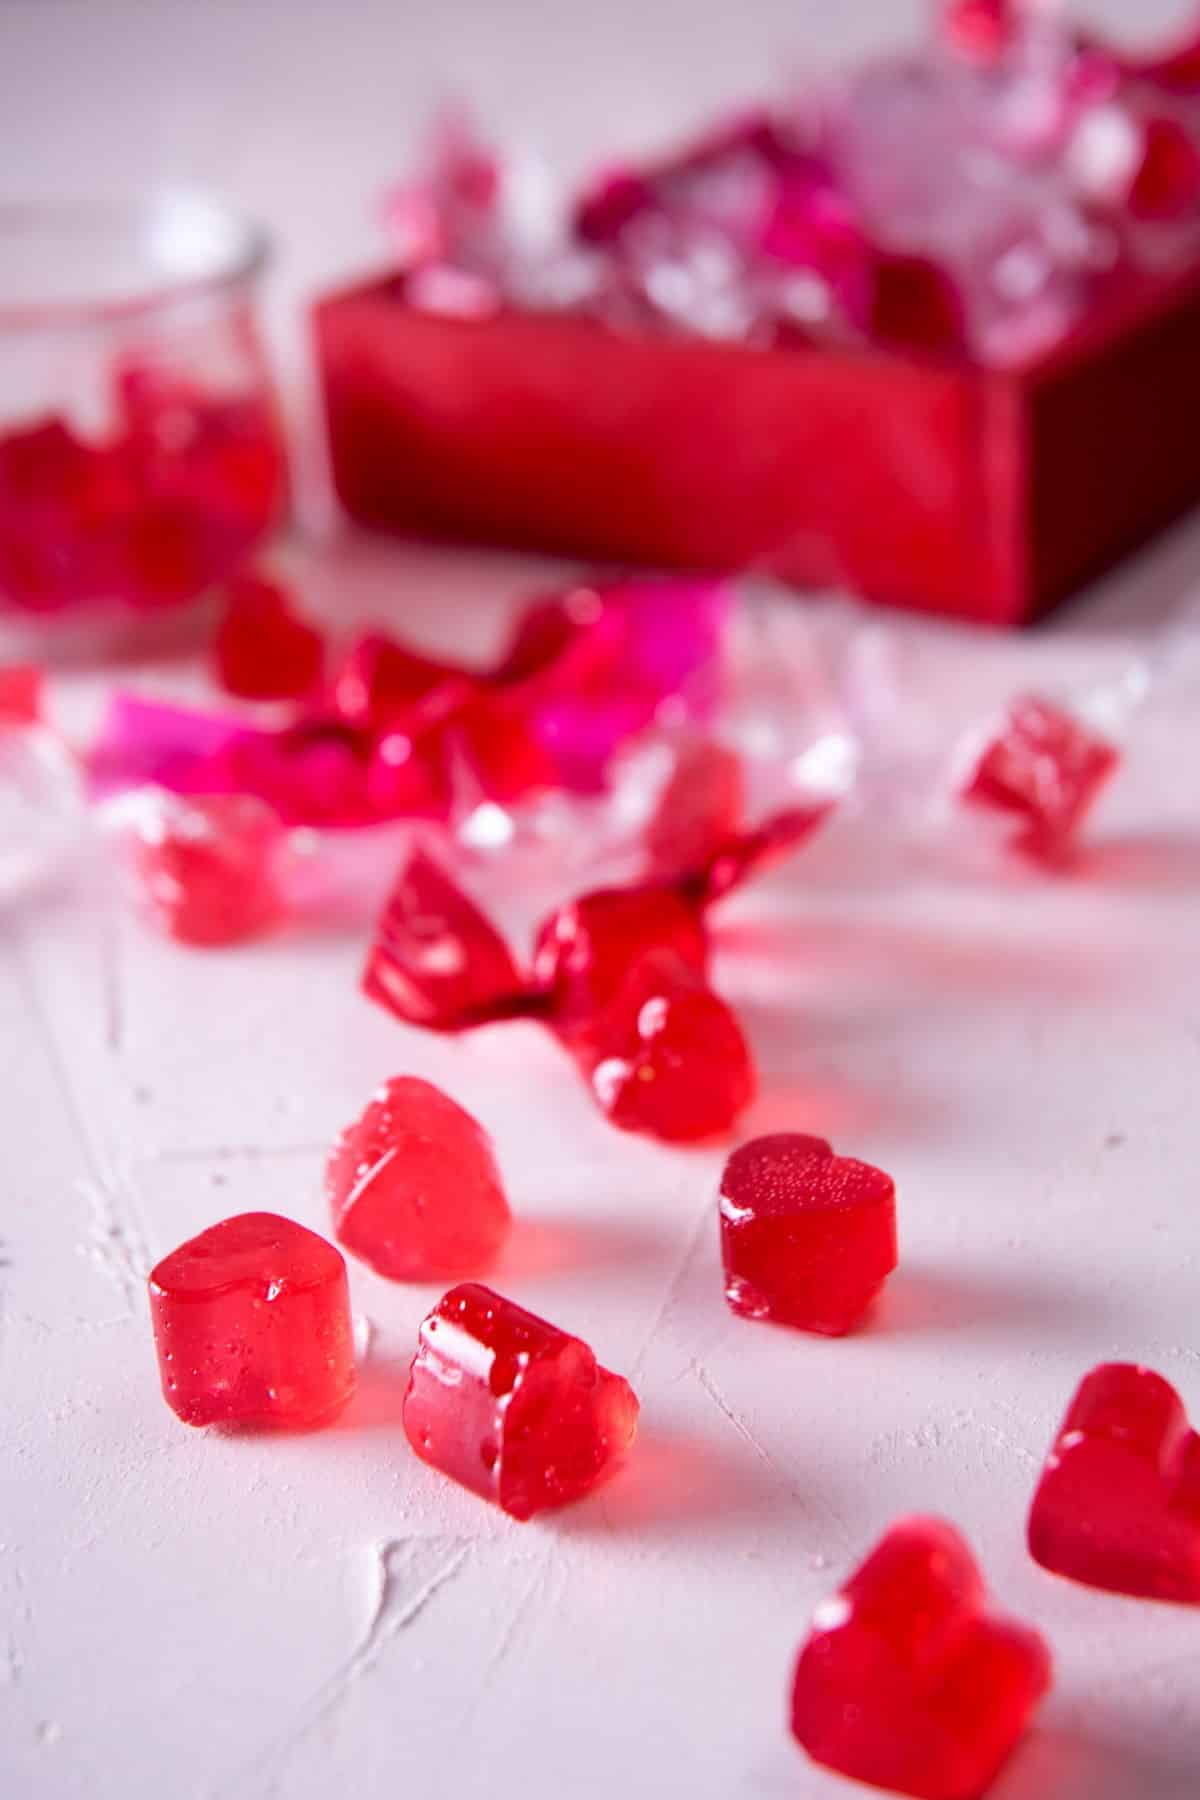 Strawberry hard candies scattered on white surface.